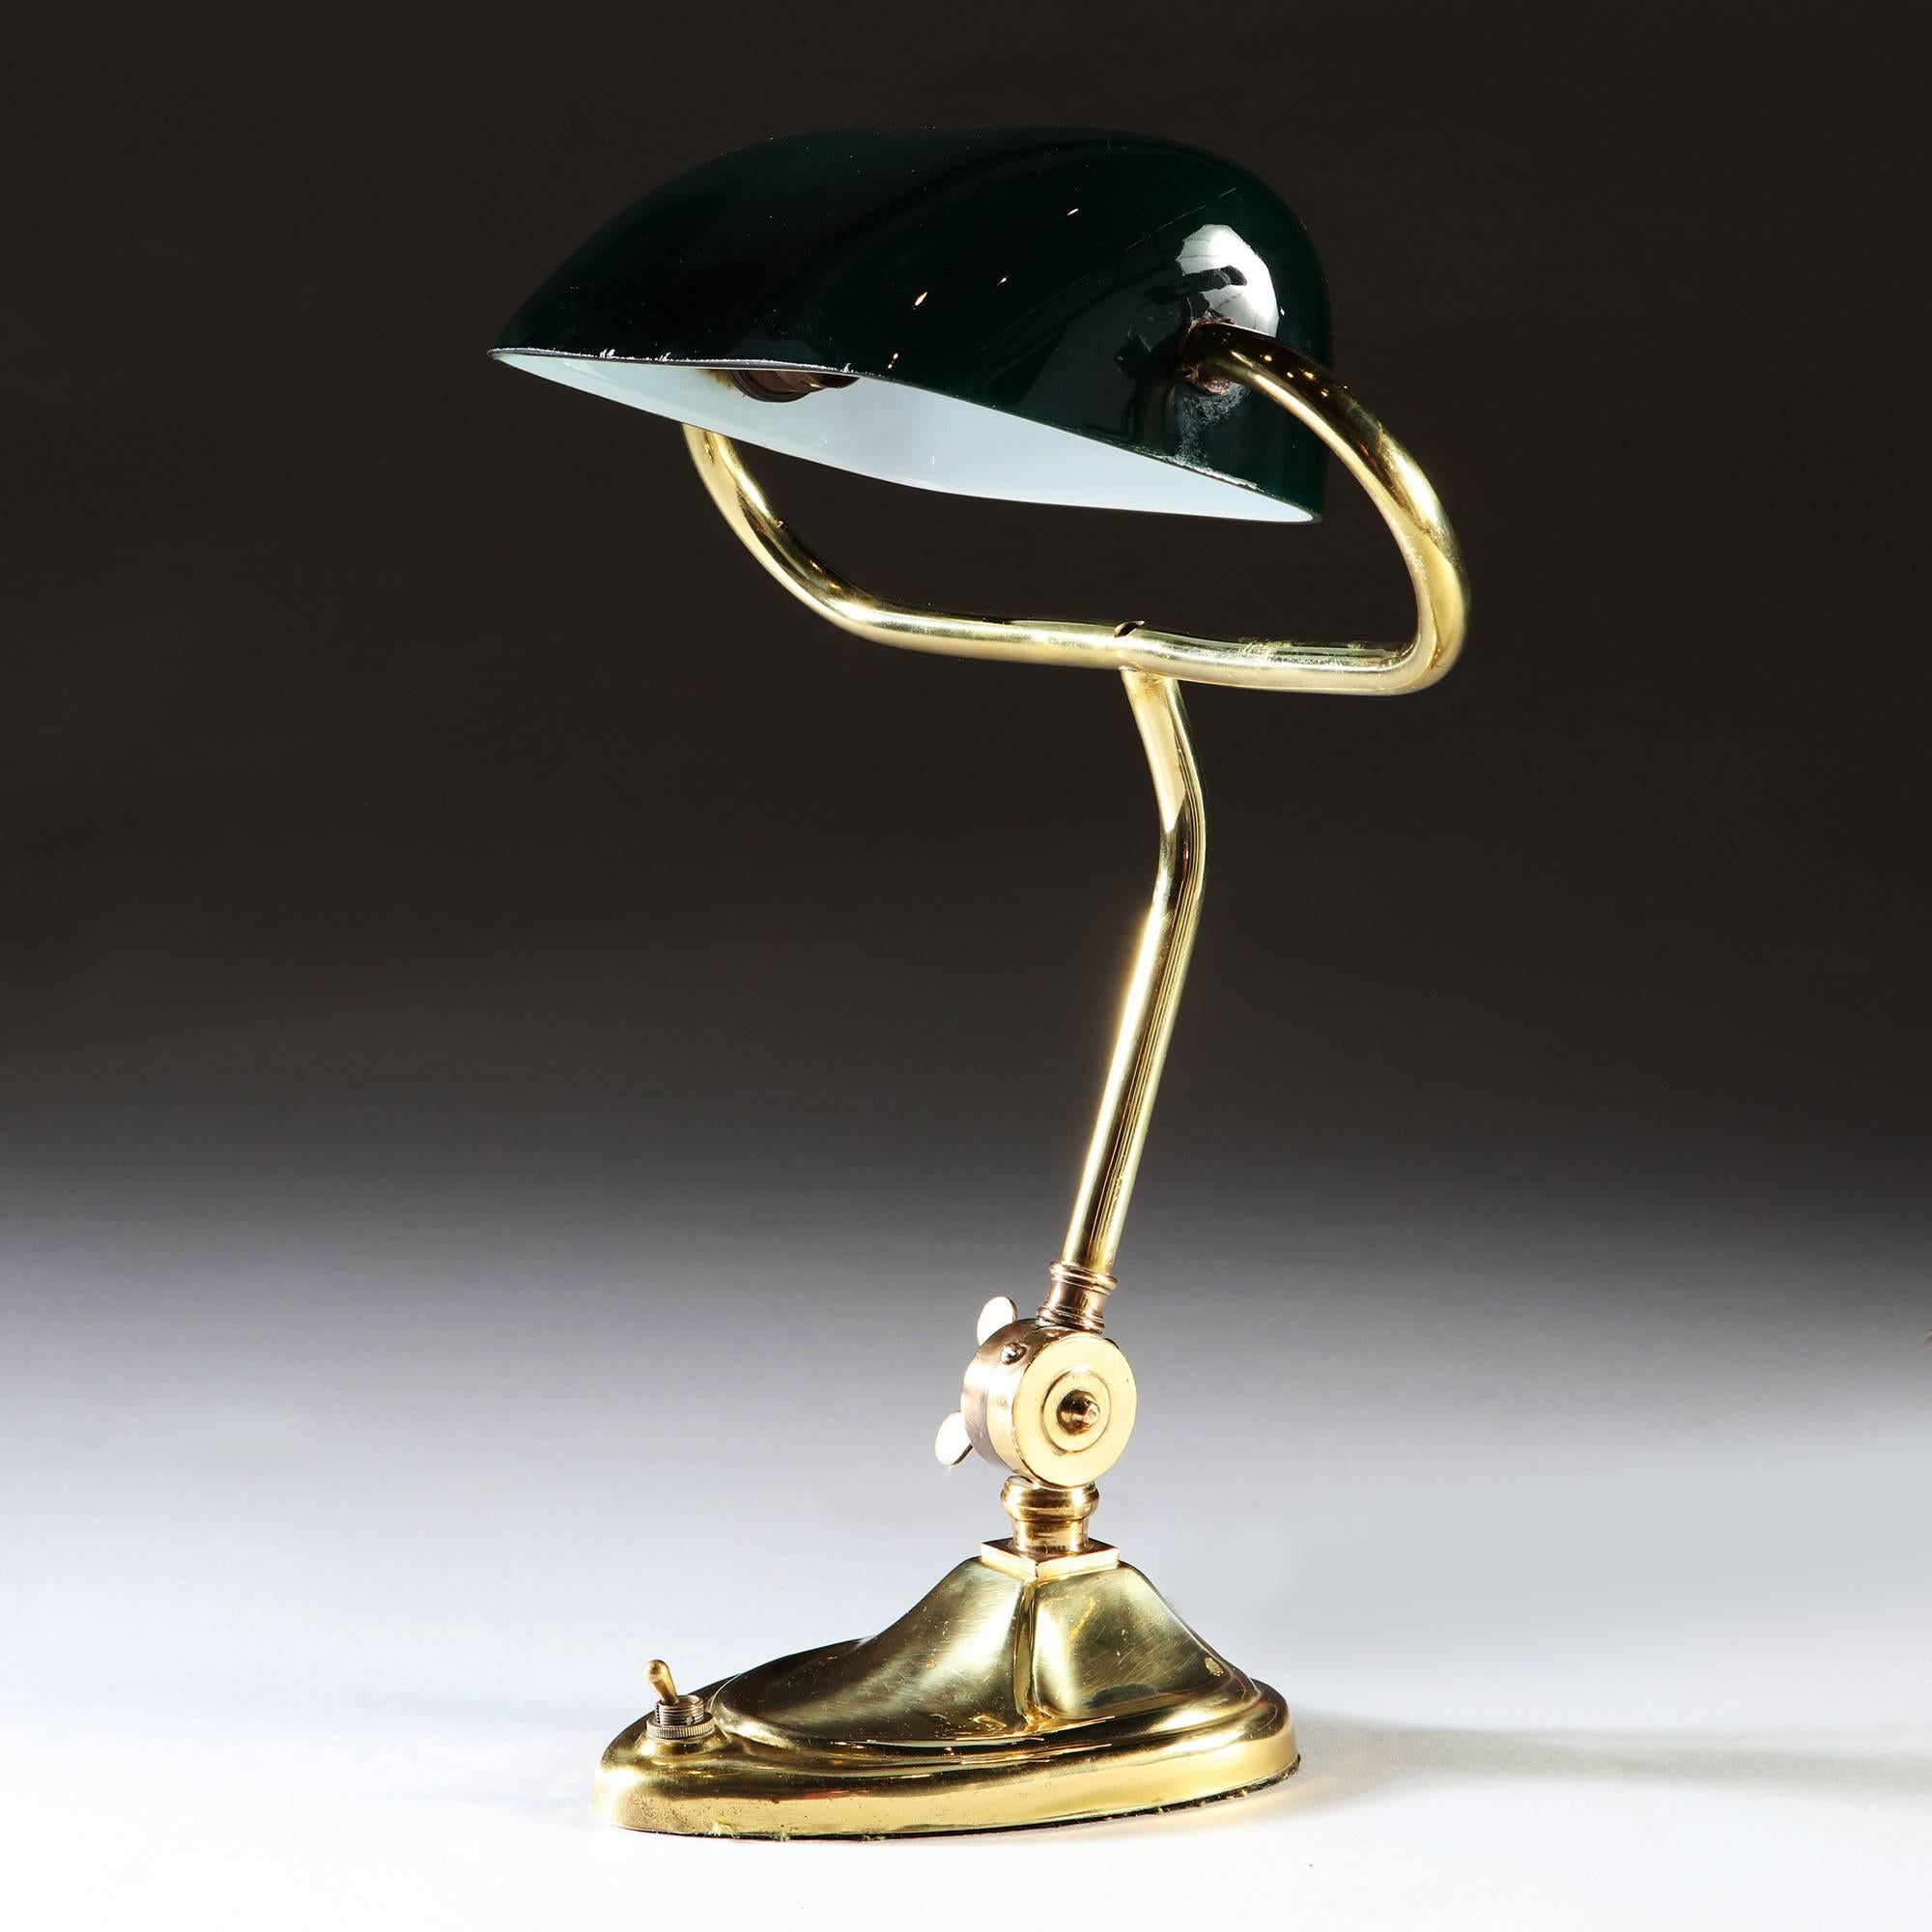 An Edward brass desk lamp with adjustable green glass shade and a heart shaped base.